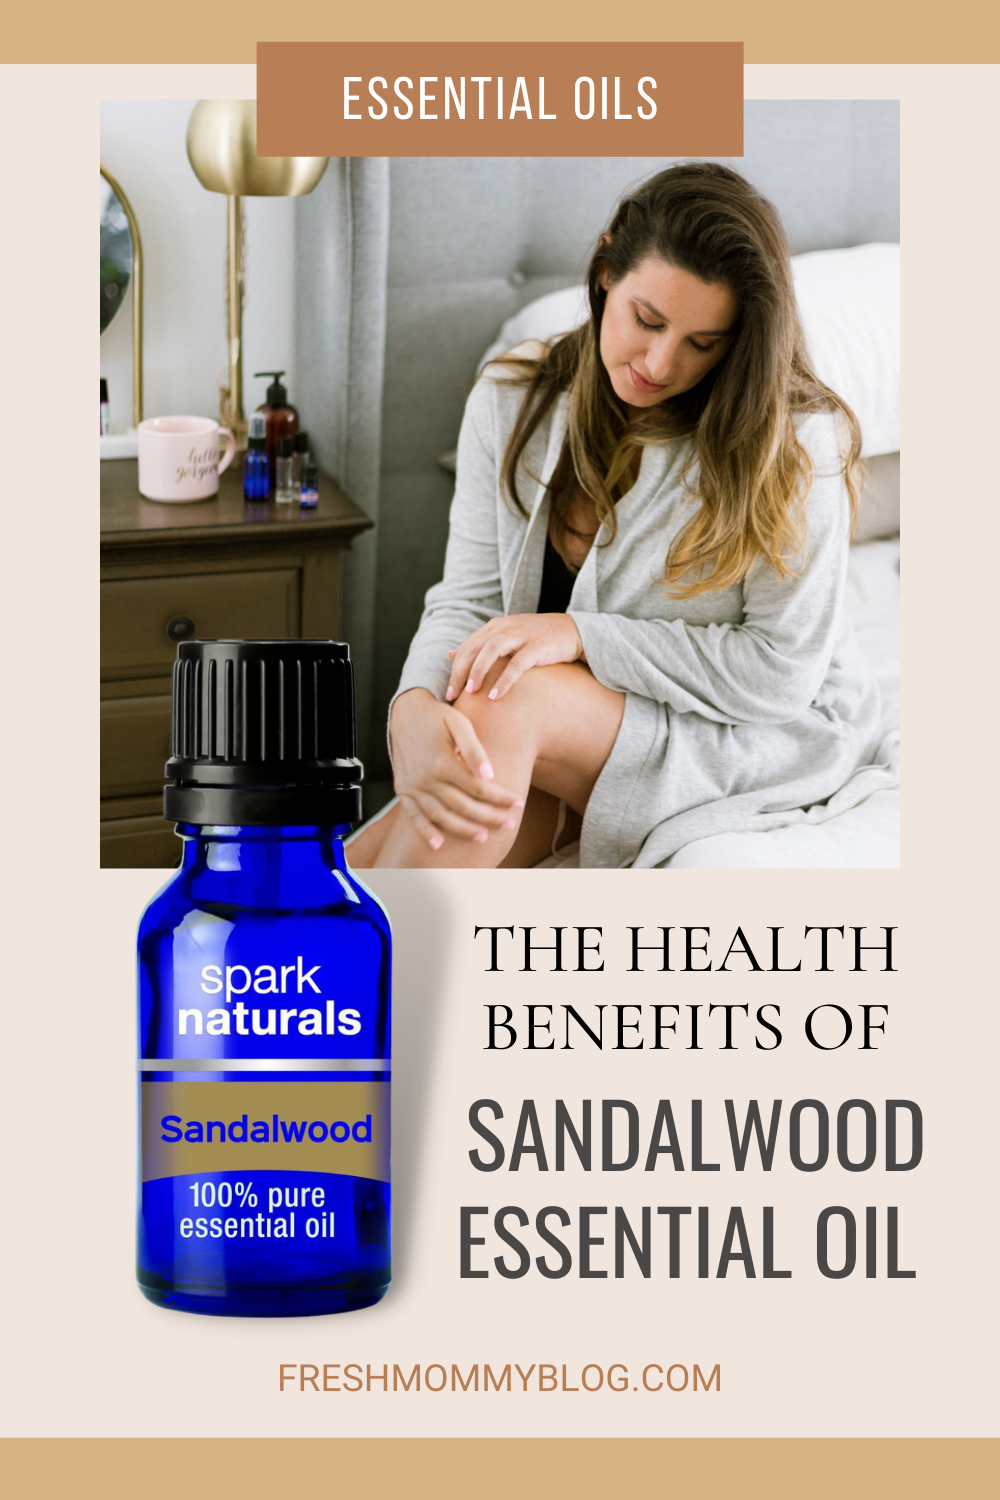 Surprising Sandalwood Essential Oil Health Benefits and Uses! Sandalwood essential oil has become a must-have in my natural medicine cabinet. We love using it in diffuser blends, but we also use it for medicinal purposes. It's surprising how versatile Sandalwood is!